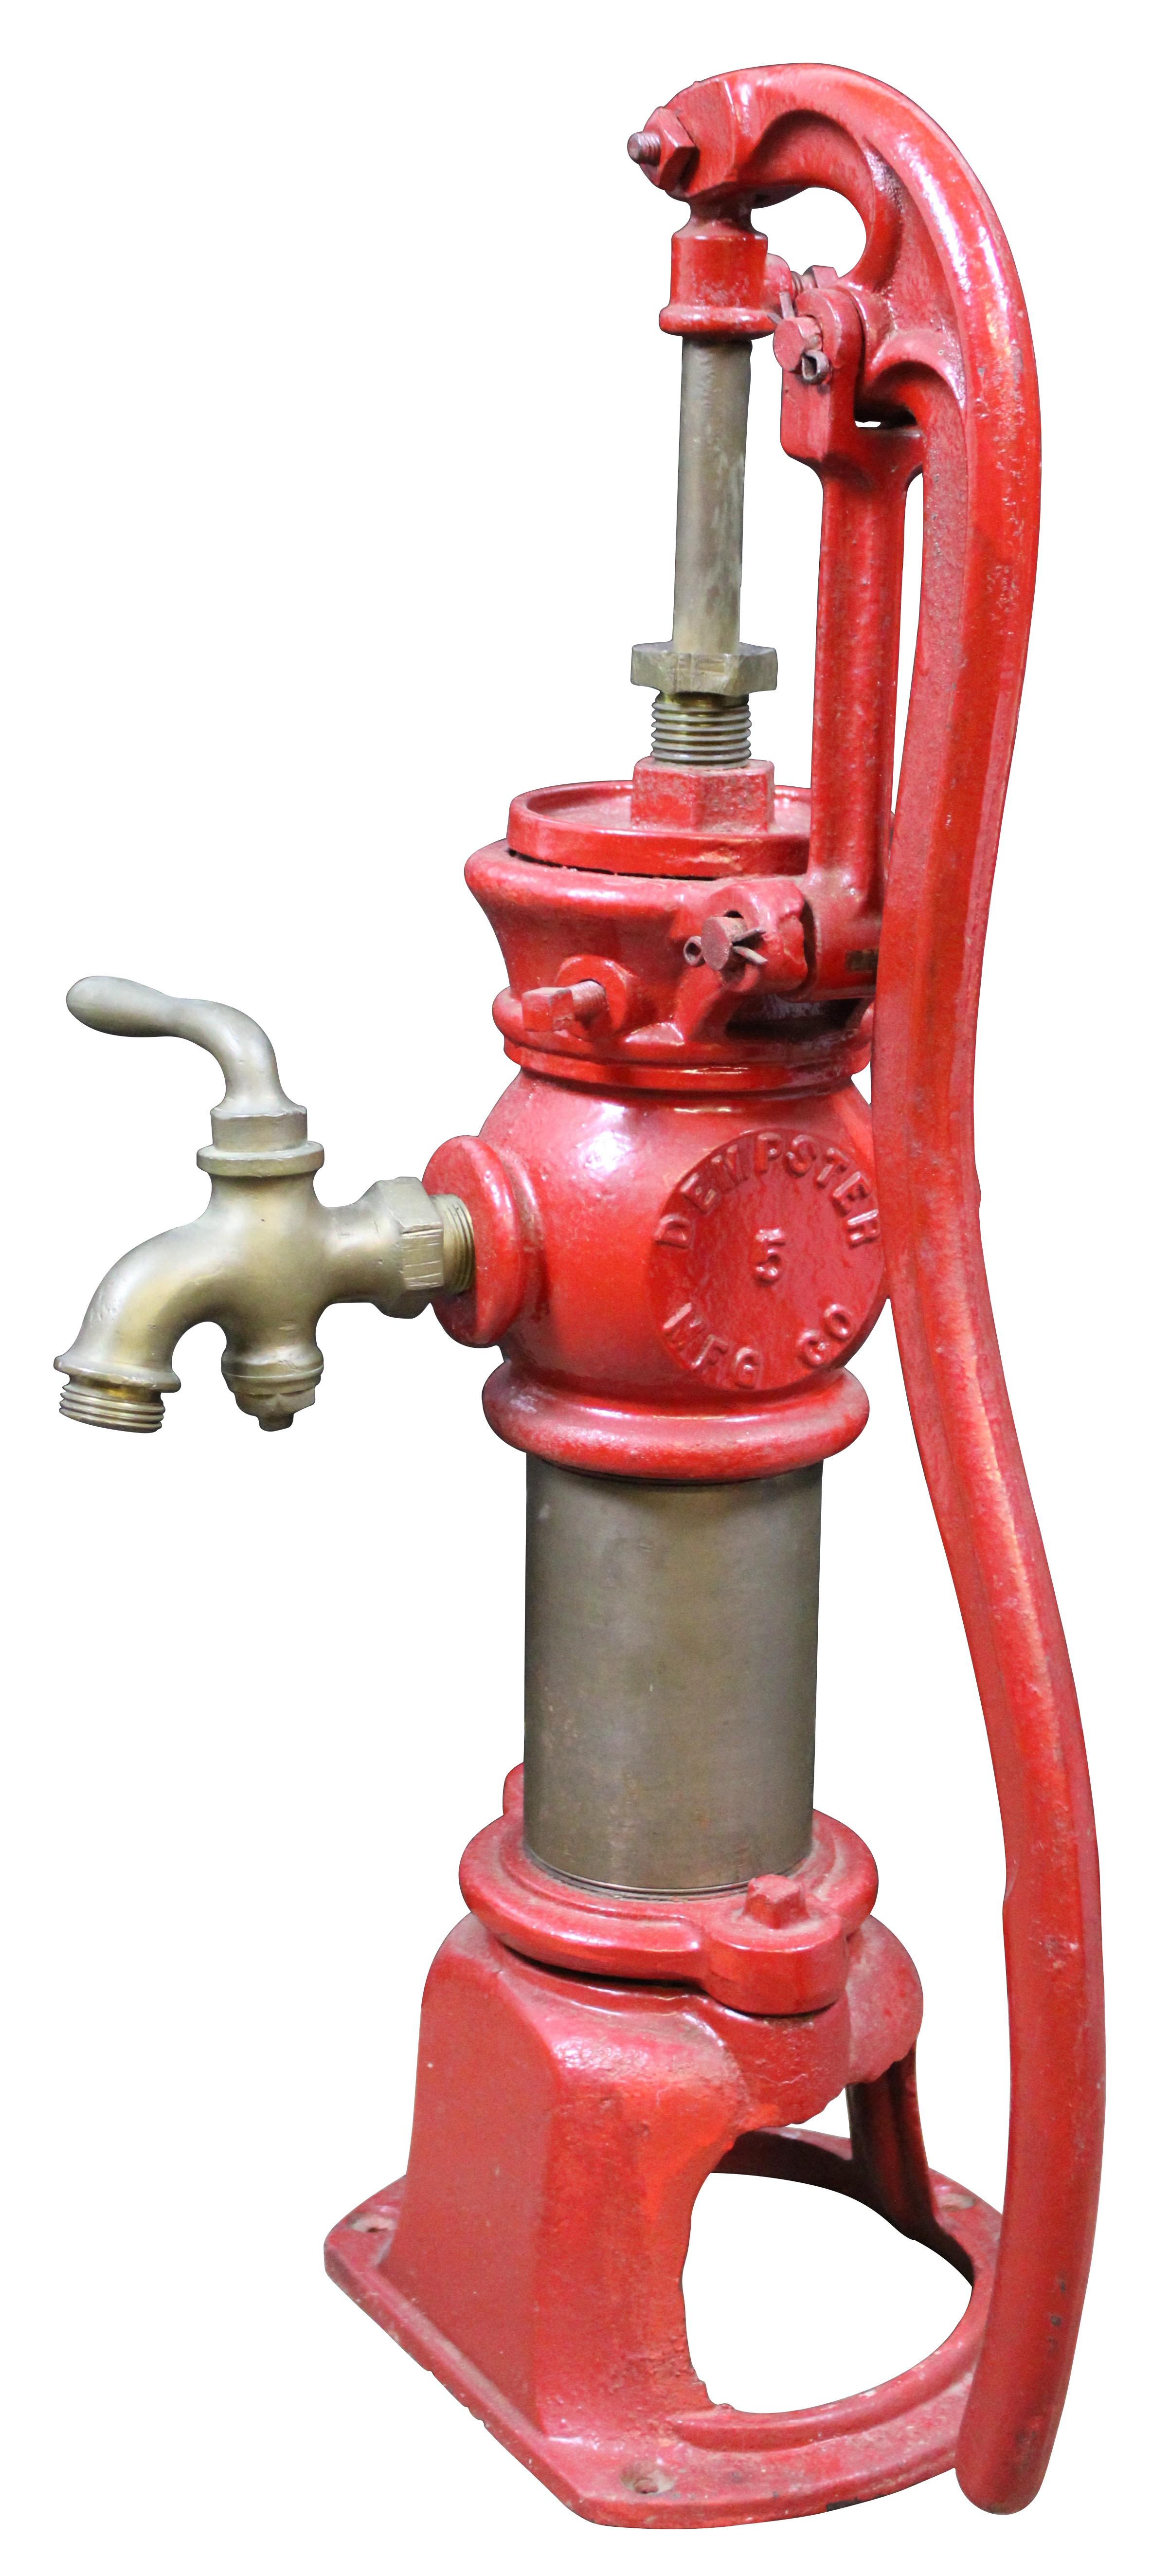 Antique American fire truck red cast iron and brass number 5 country farmhouse hand water pump with spigot by Dempster Manufacturing Company. Many people of the time believed that drinking from cast iron was not healthy. This belief lead to